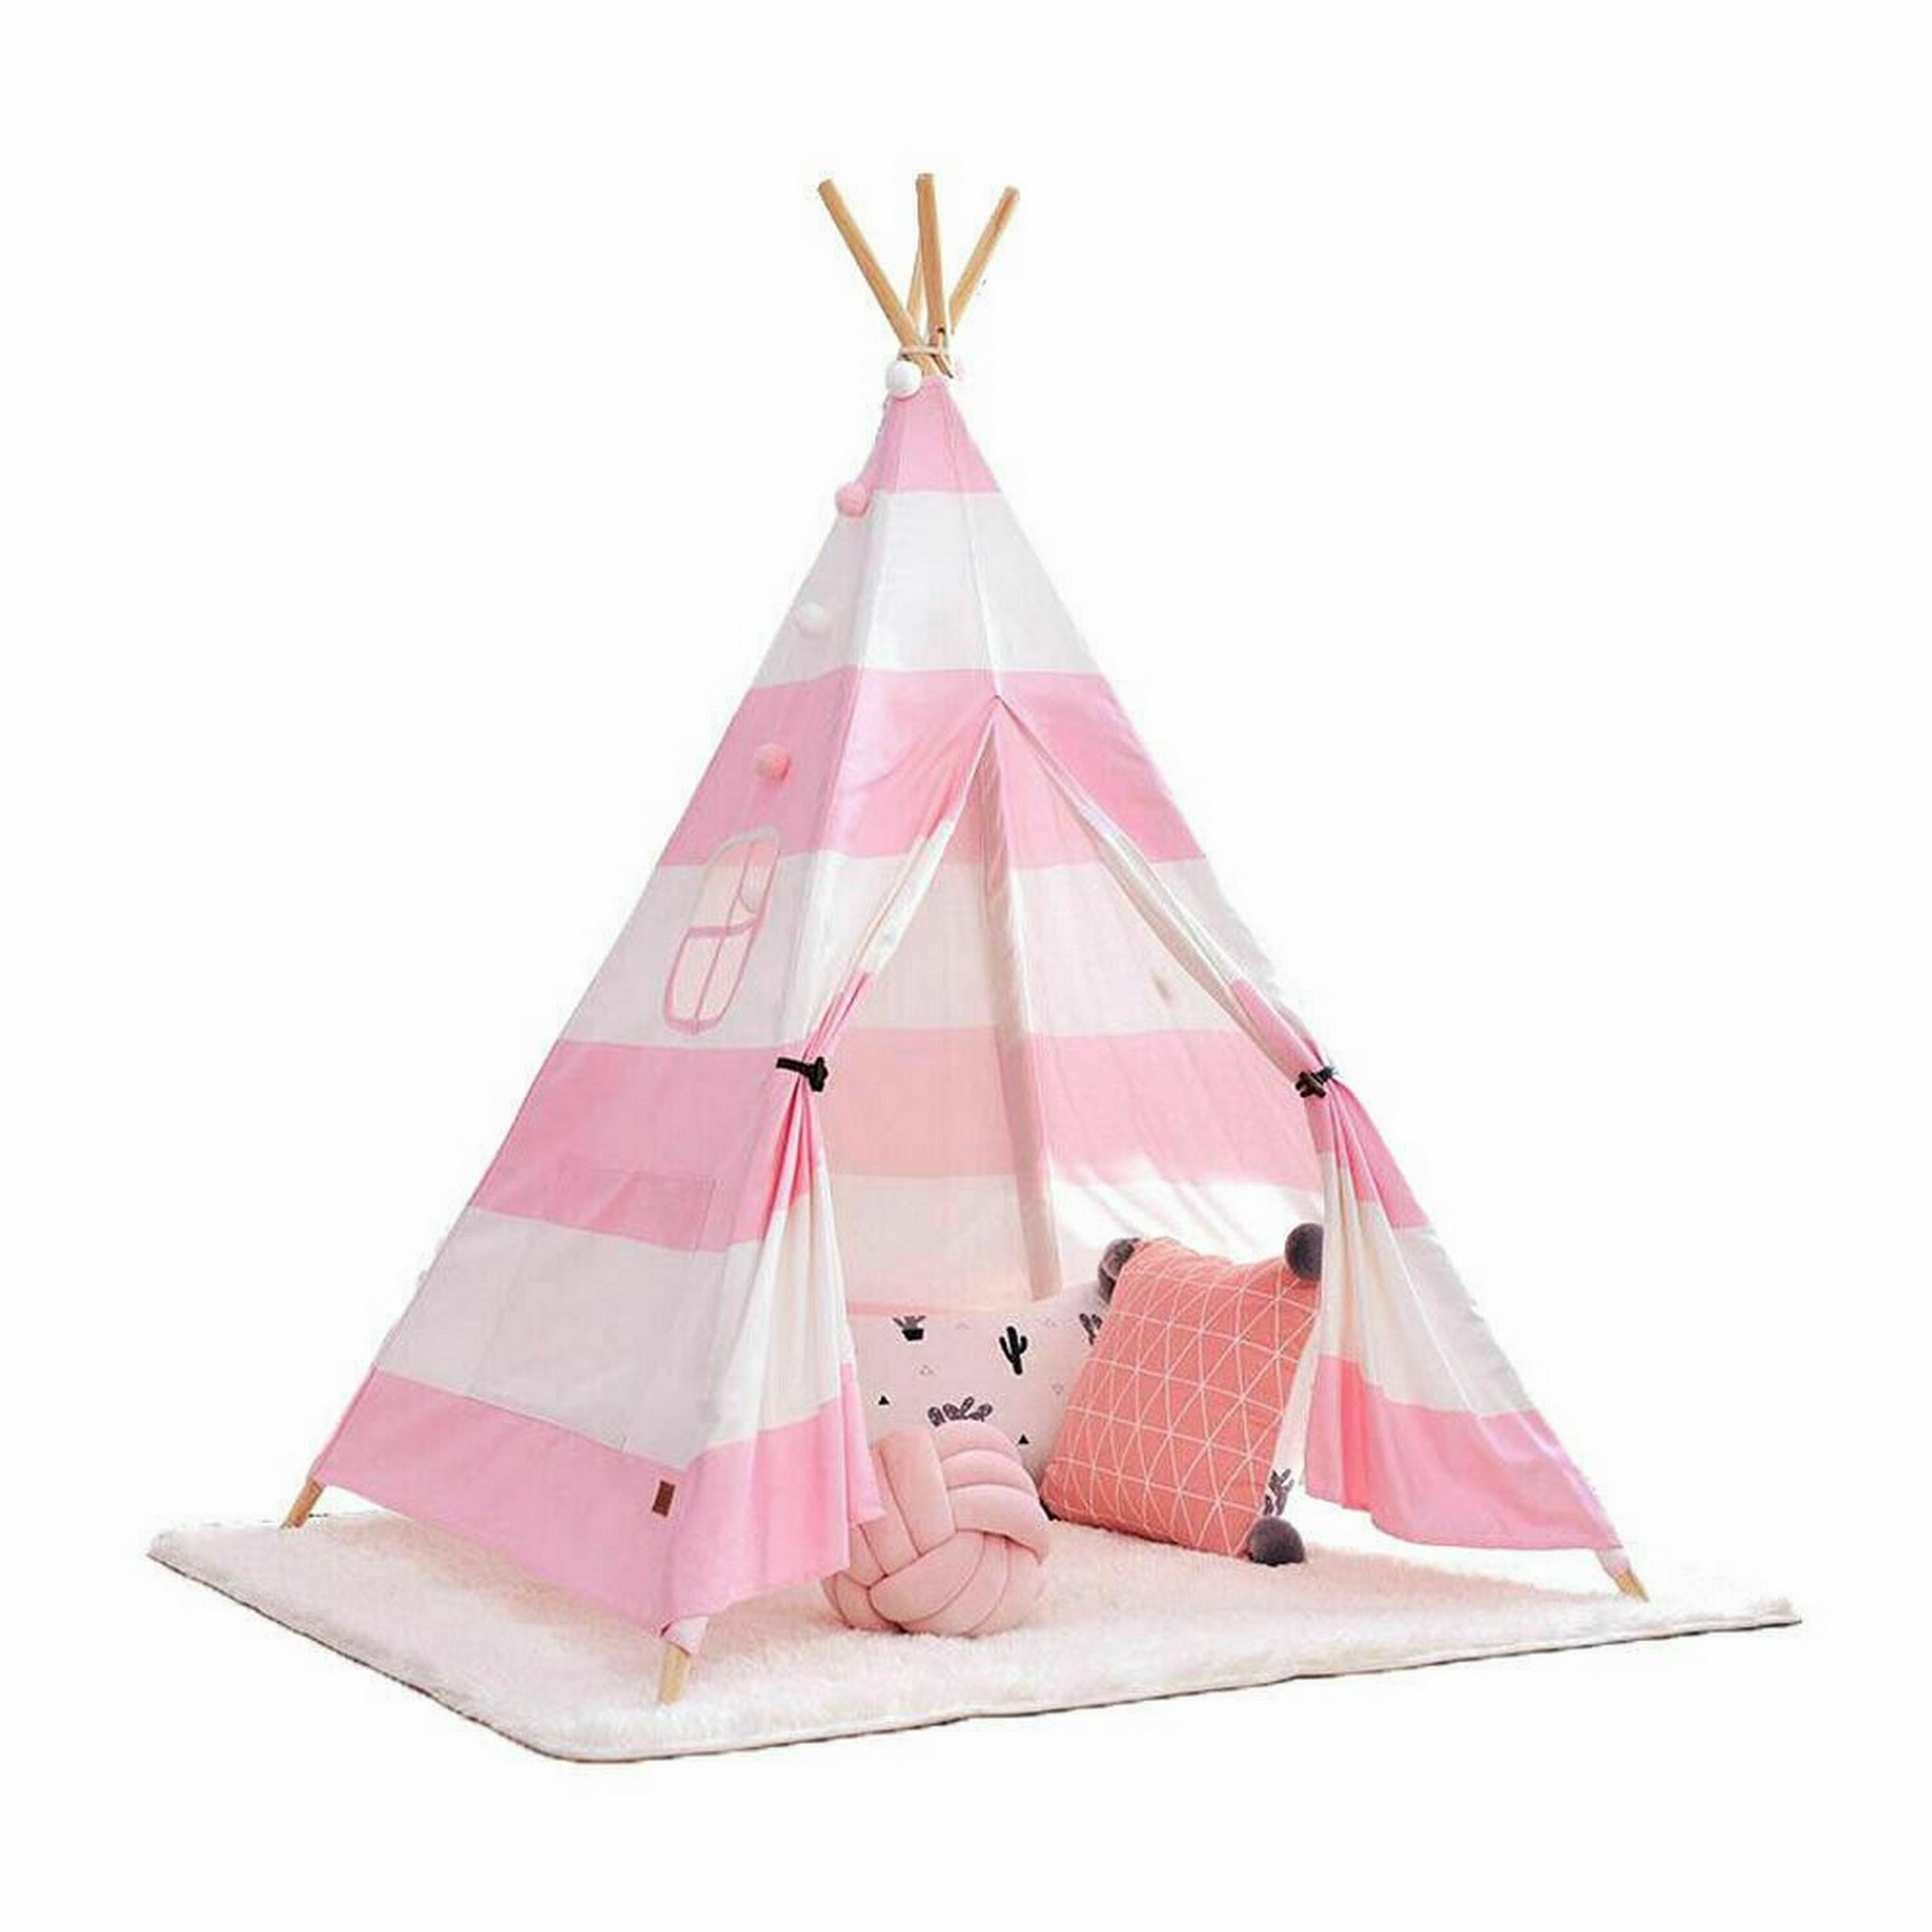 Stripe Cotton Canvas Kids Teepee Tent Childrens Wigwam Indoor Outdoor Play House 